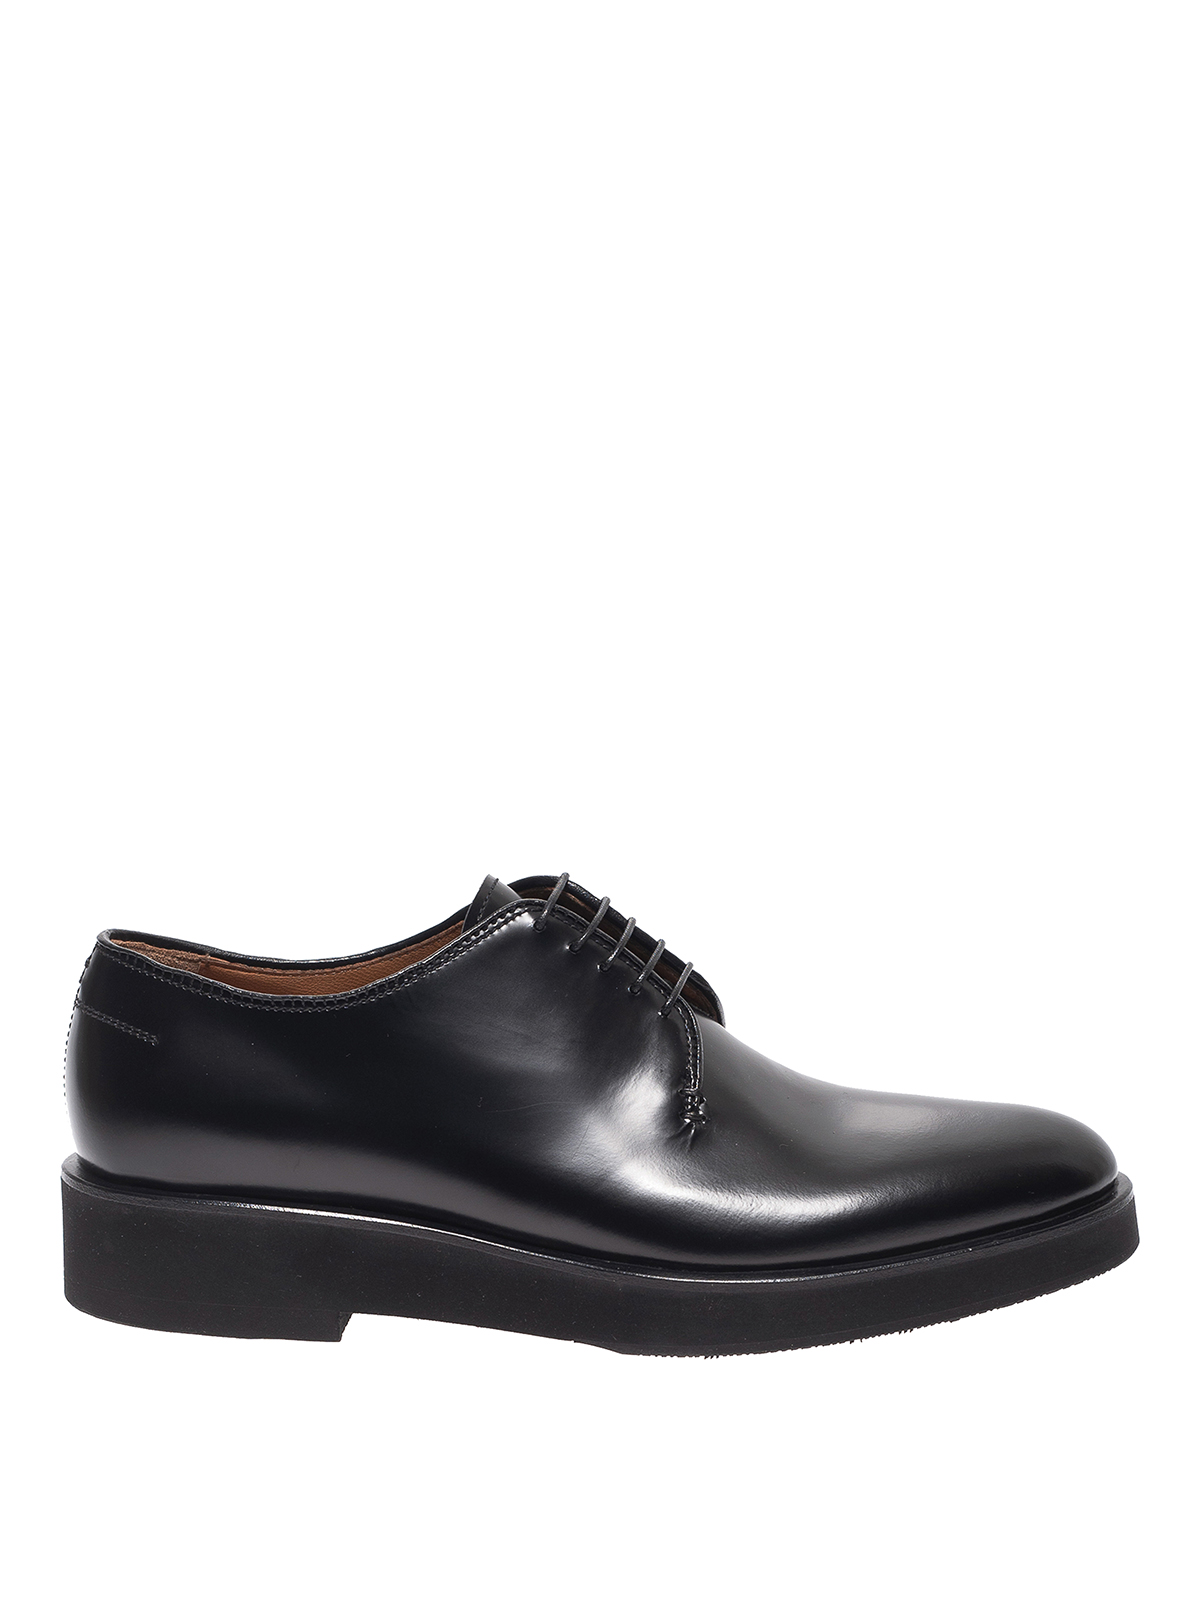 Premiata Derby Shoes In Black Brushed Leather | ModeSens